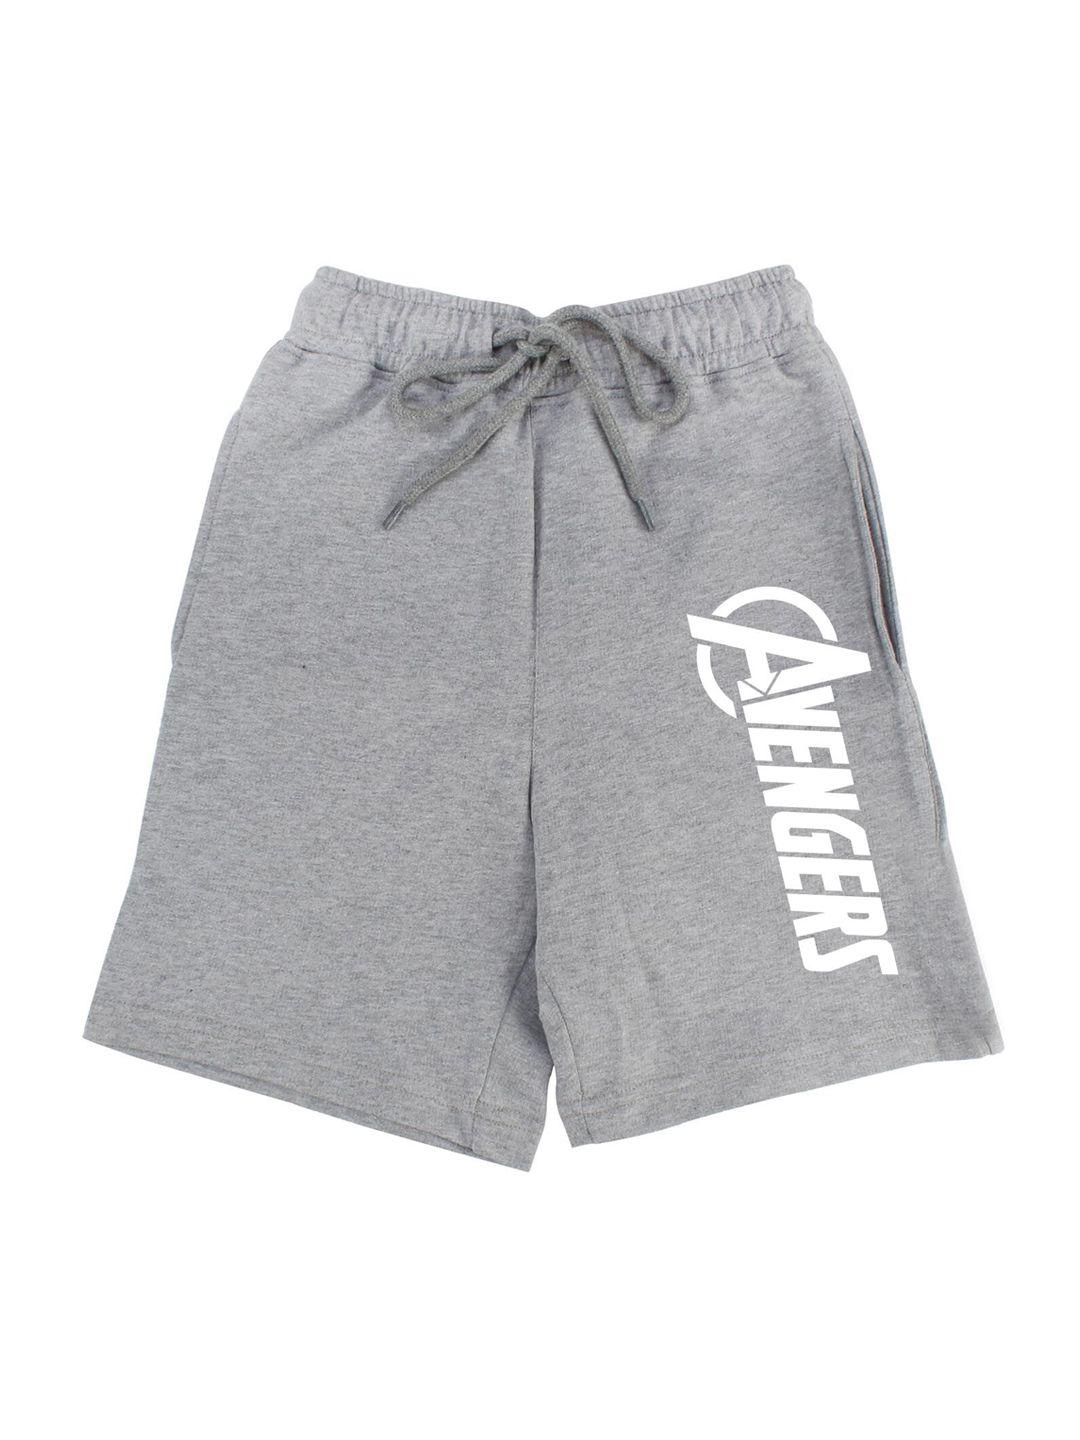 marvel by wear your mind boys grey avengers solid shorts